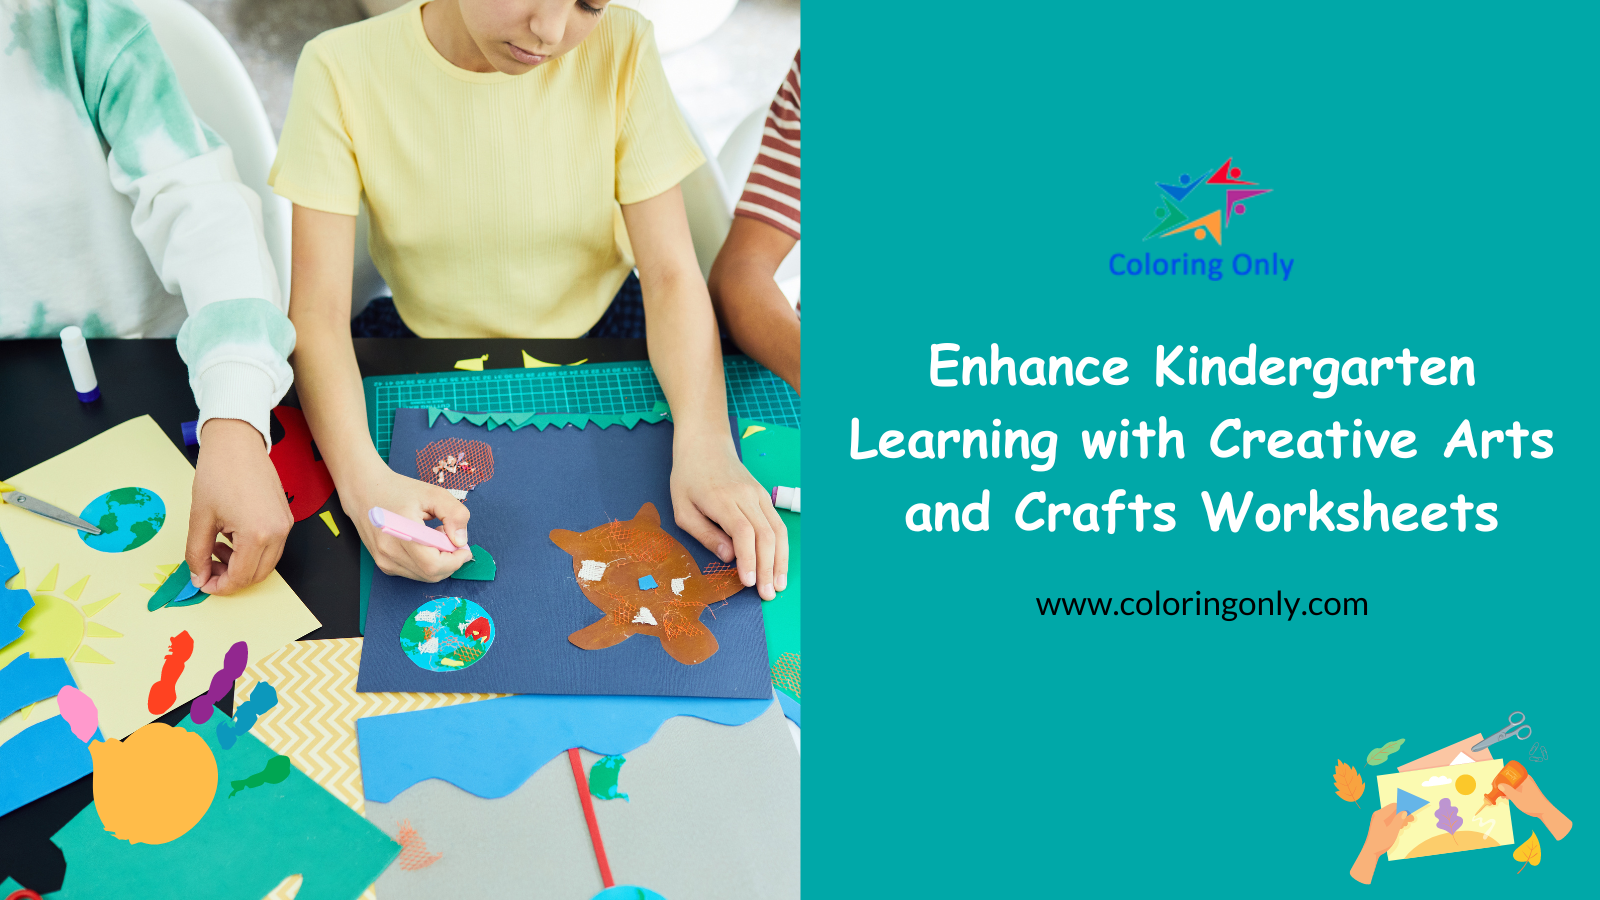 Enhance Kindergarten Learning with Creative Arts and Crafts Worksheets